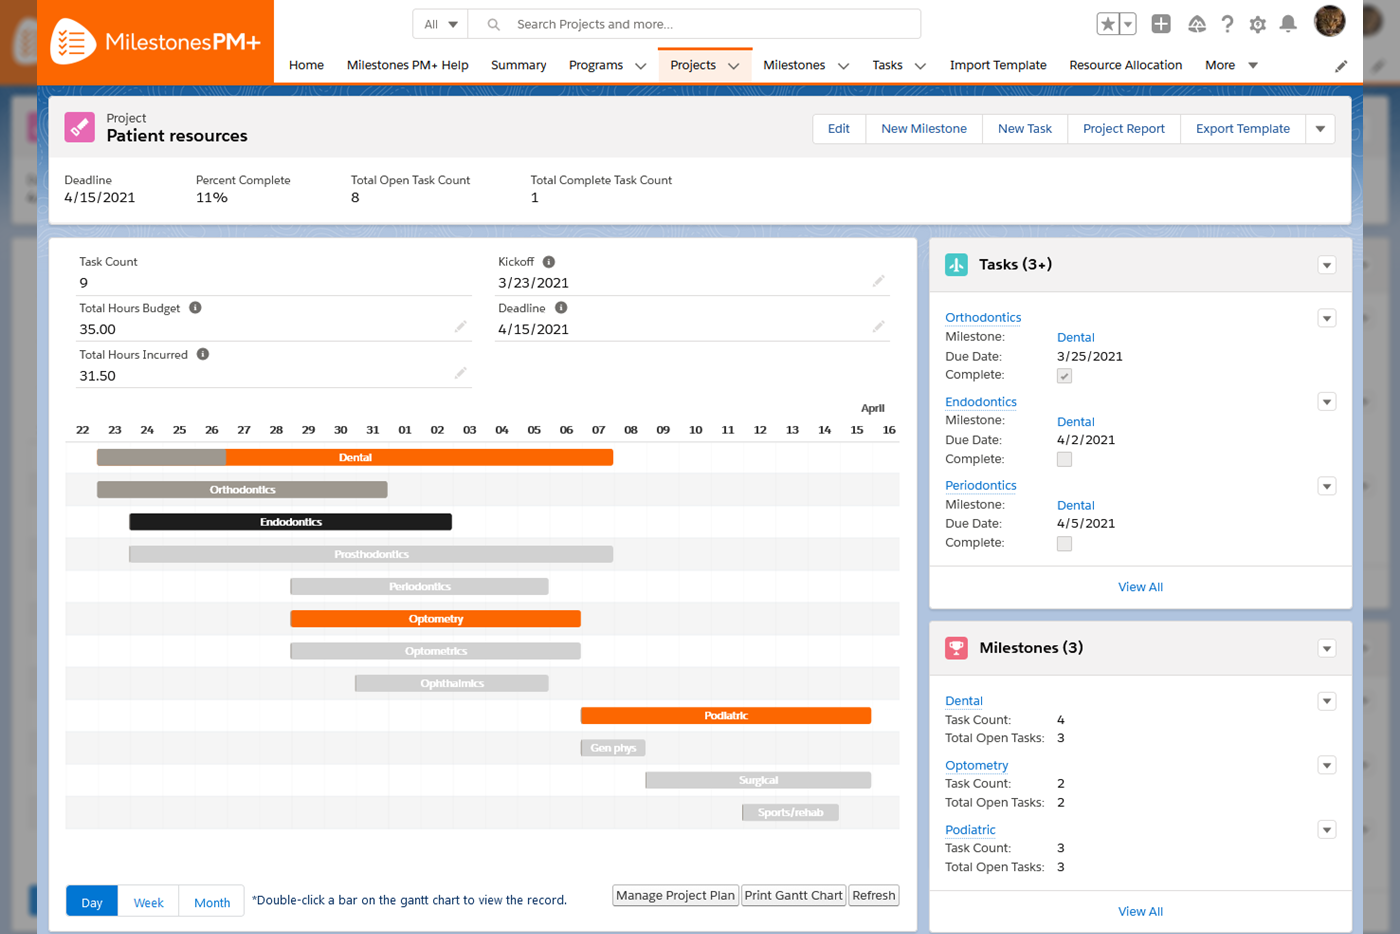 Project Management made easy with Milestones PM+, free for Salesforce